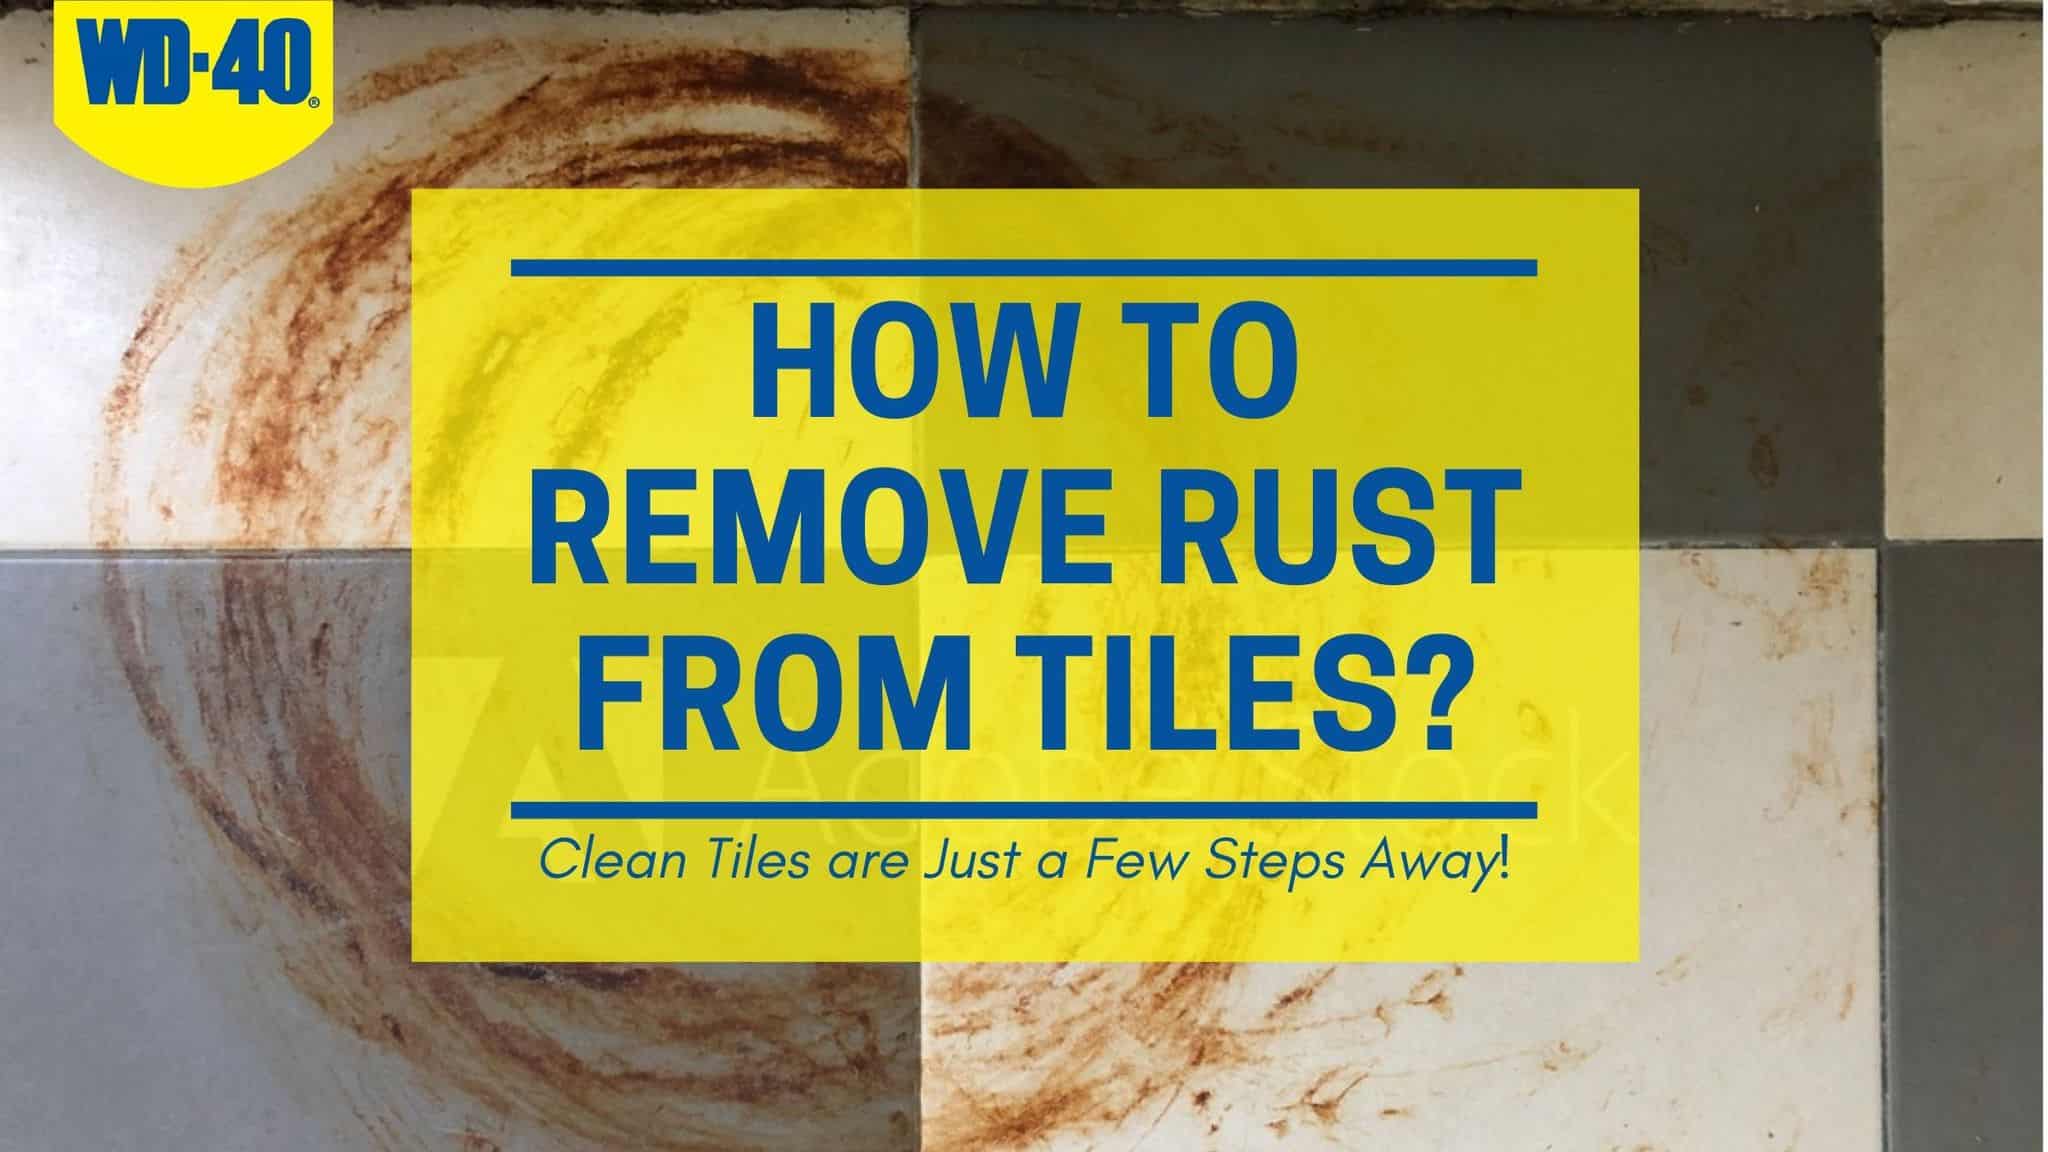 HOW TO REMOVE RUST FROM TILES? - WD-24 Pakistan